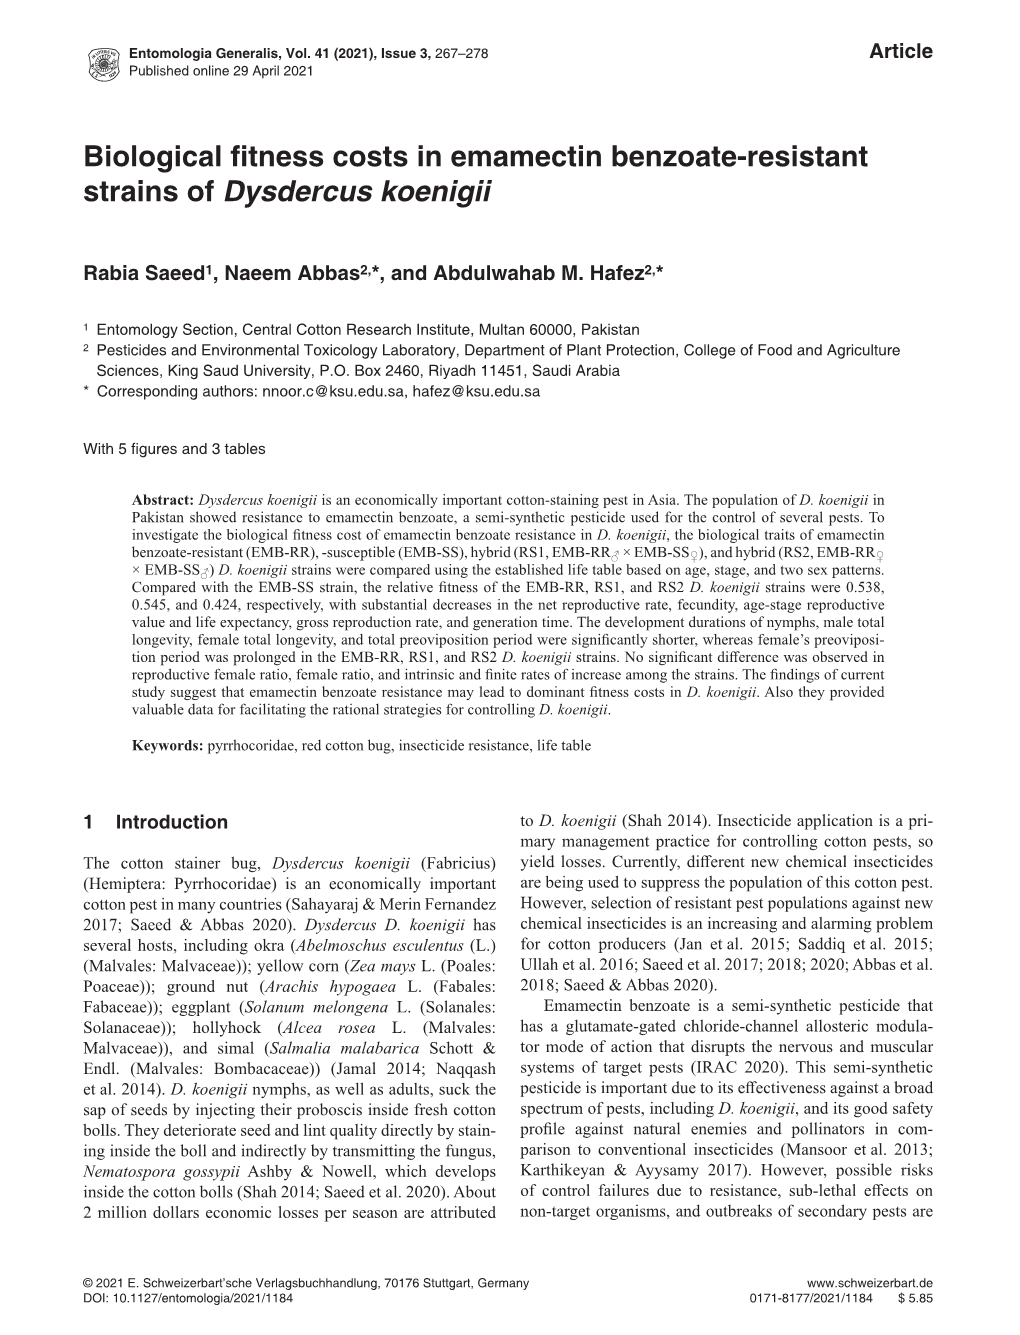 Biological Fitness Costs in Emamectin Benzoate-Resistant Strains of Dysdercus Koenigii